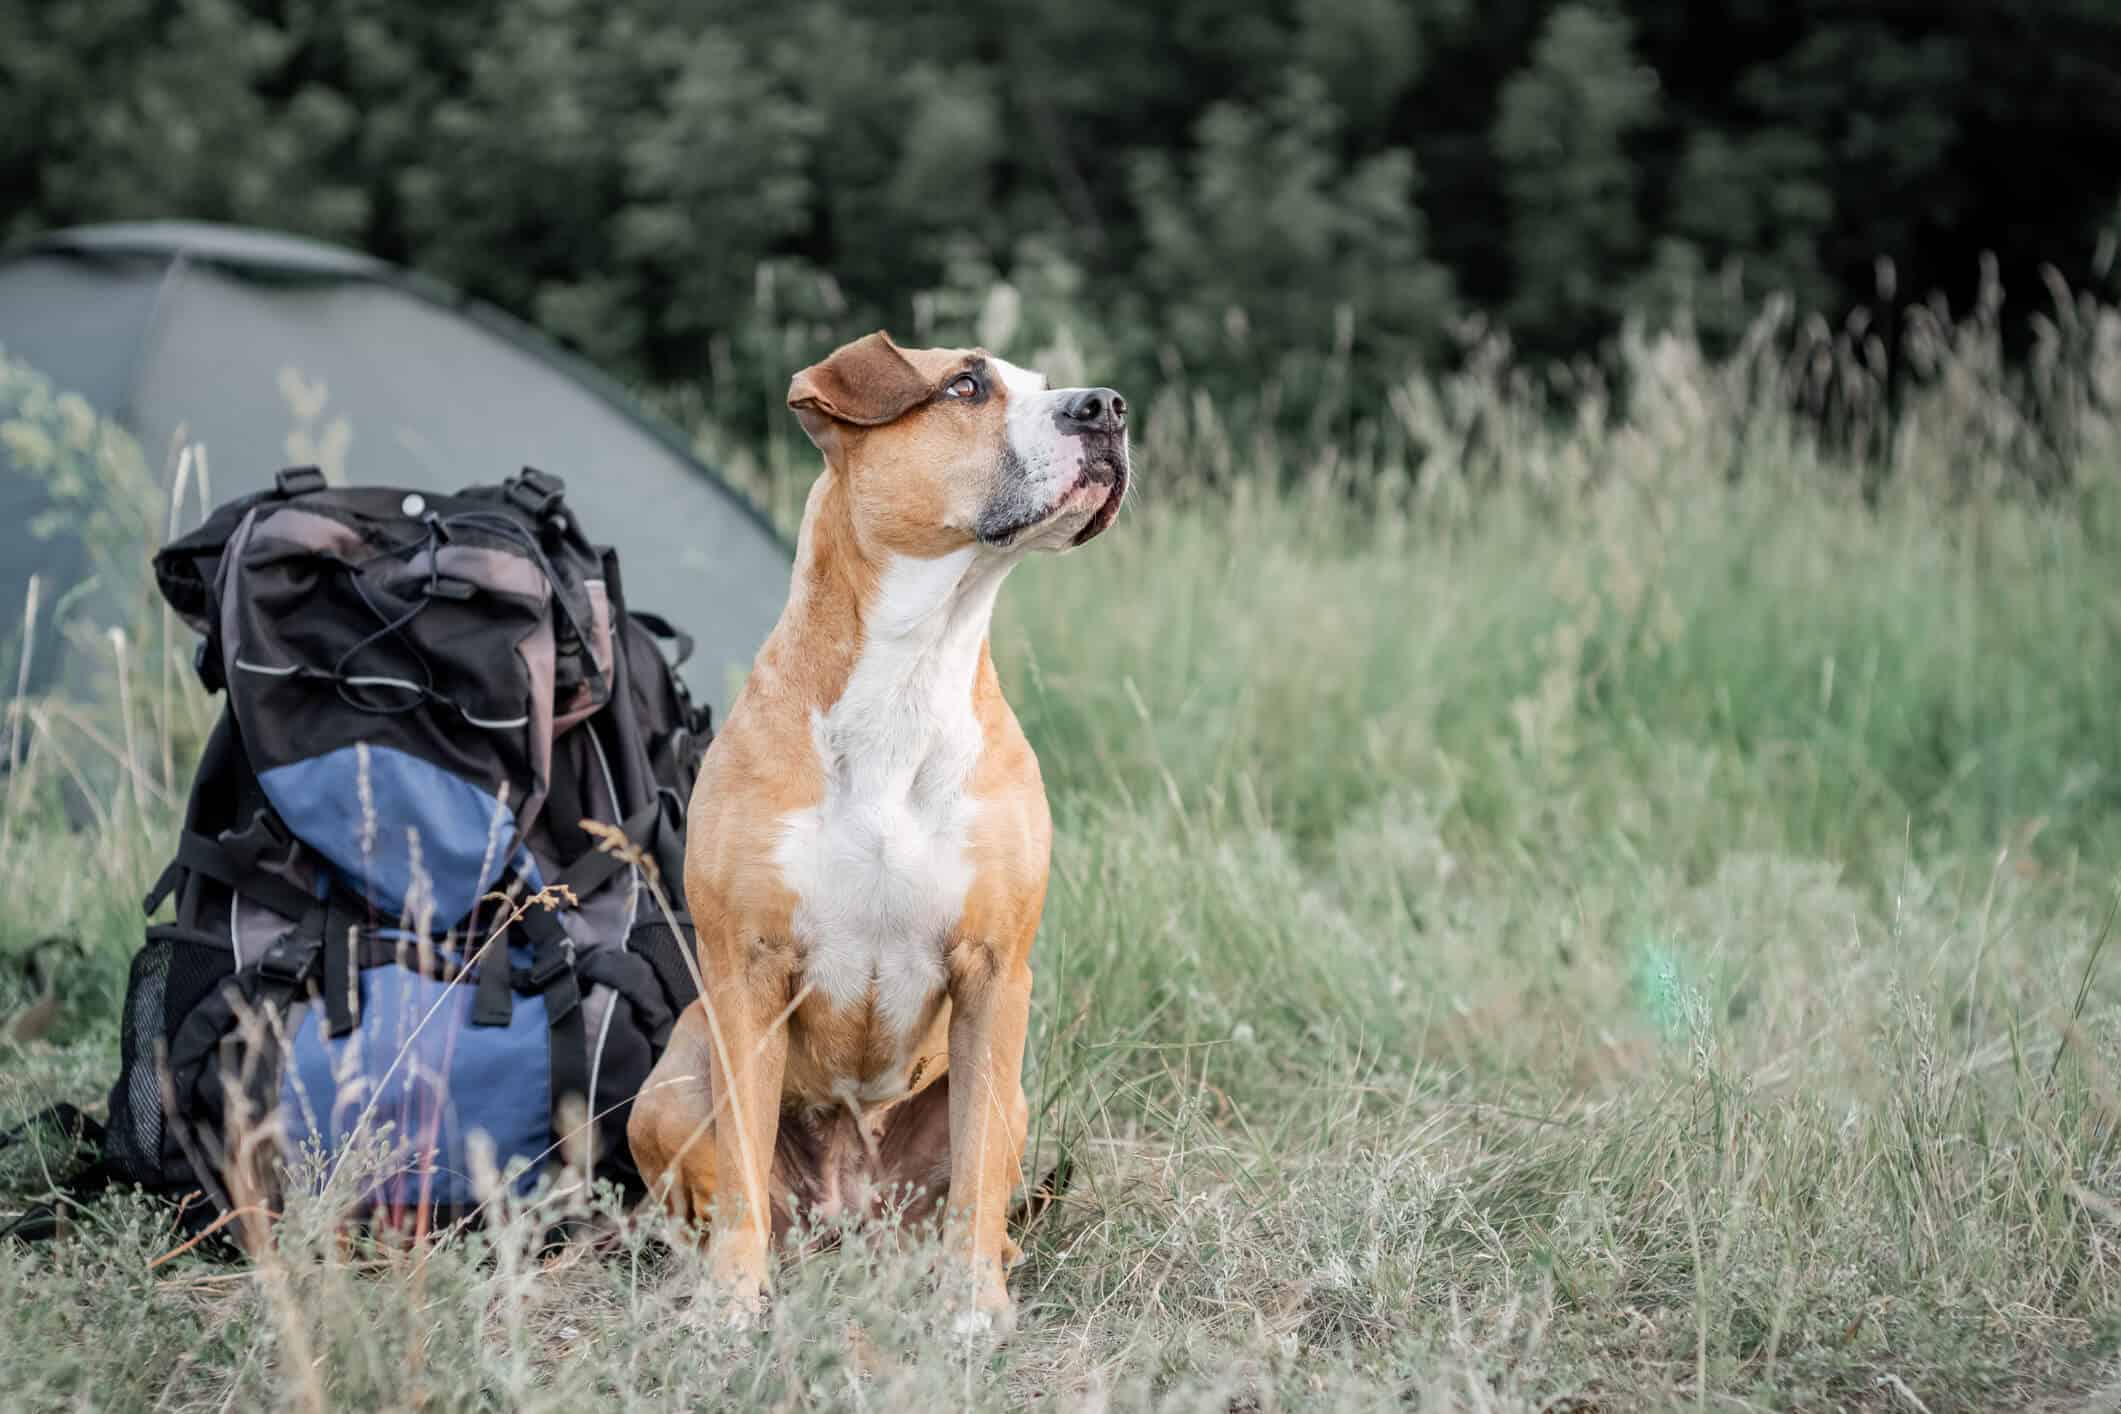 Adorable domestic pet sits near a large hiking rucksack in front of a tent at nature